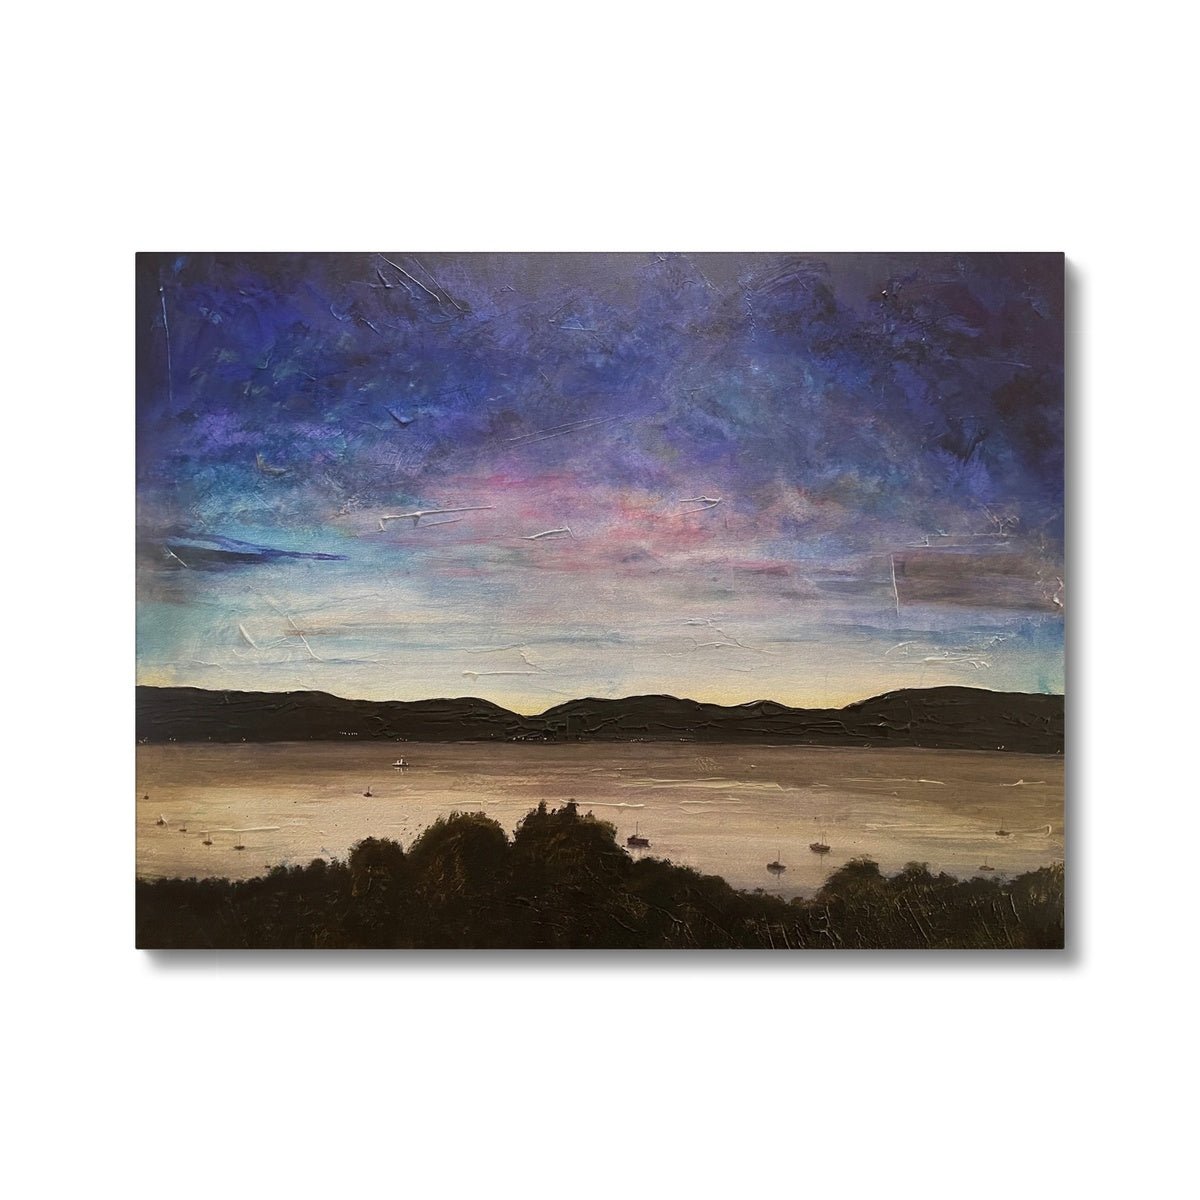 River Clyde Twilight Painting | Canvas From Scotland-Contemporary Stretched Canvas Prints-River Clyde Art Gallery-24"x18"-Paintings, Prints, Homeware, Art Gifts From Scotland By Scottish Artist Kevin Hunter